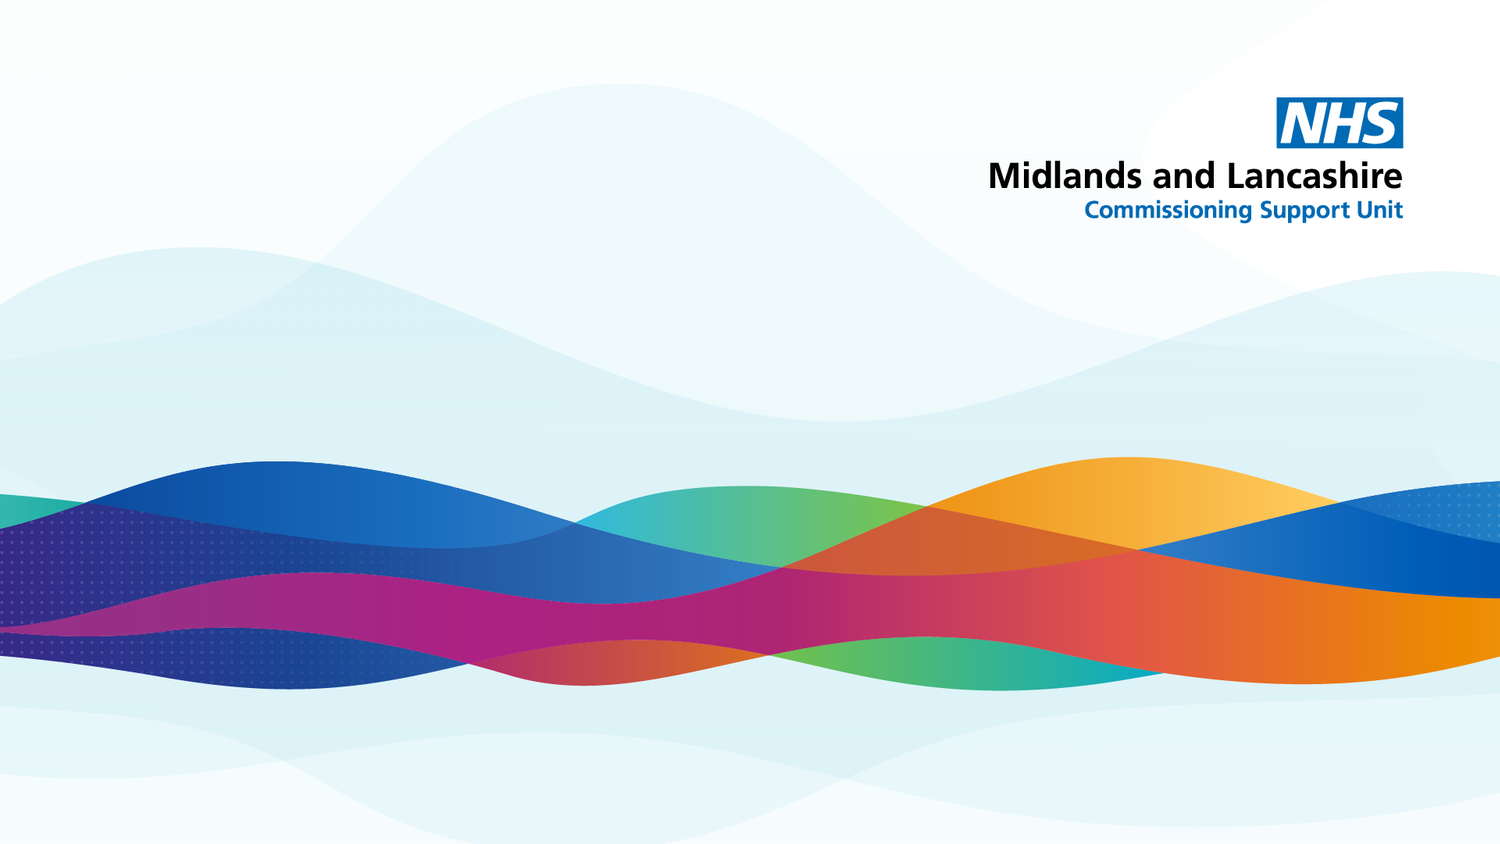 Midlands and Lancashire Commissioning Support Unit